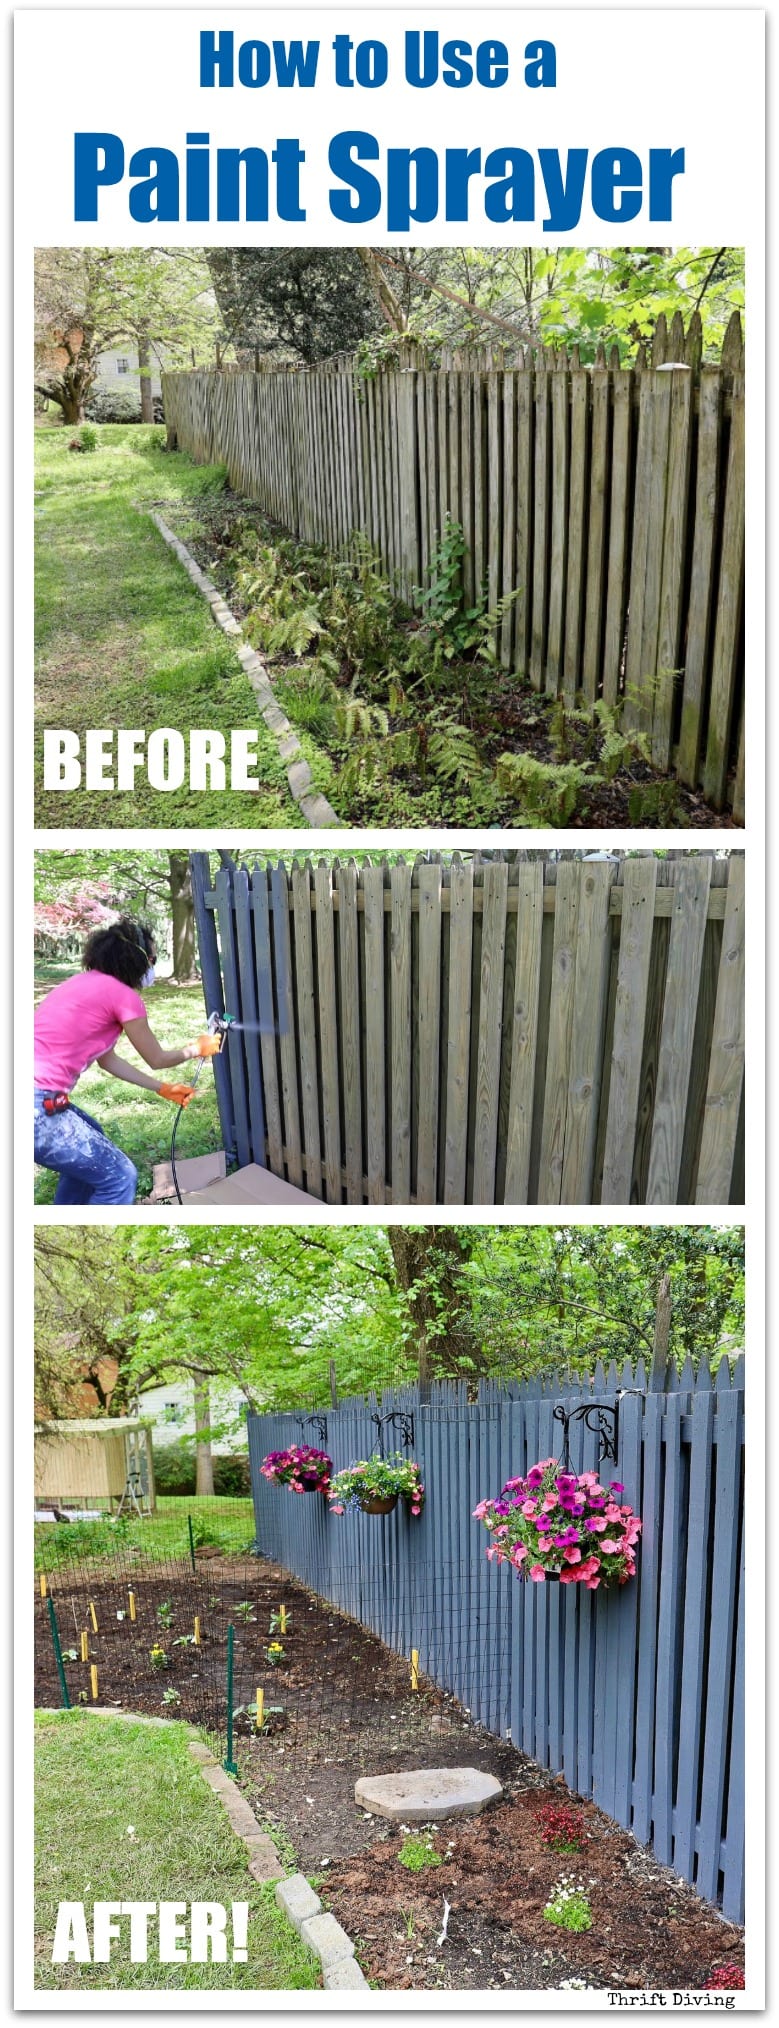 How to Use a Paint Sprayer - Use a paint sprayer to paint a wood fence, deck, siding, or even use it on interior projects and furniture. See this old ugly fence makeover using a paint sprayer. - Thrift Diving